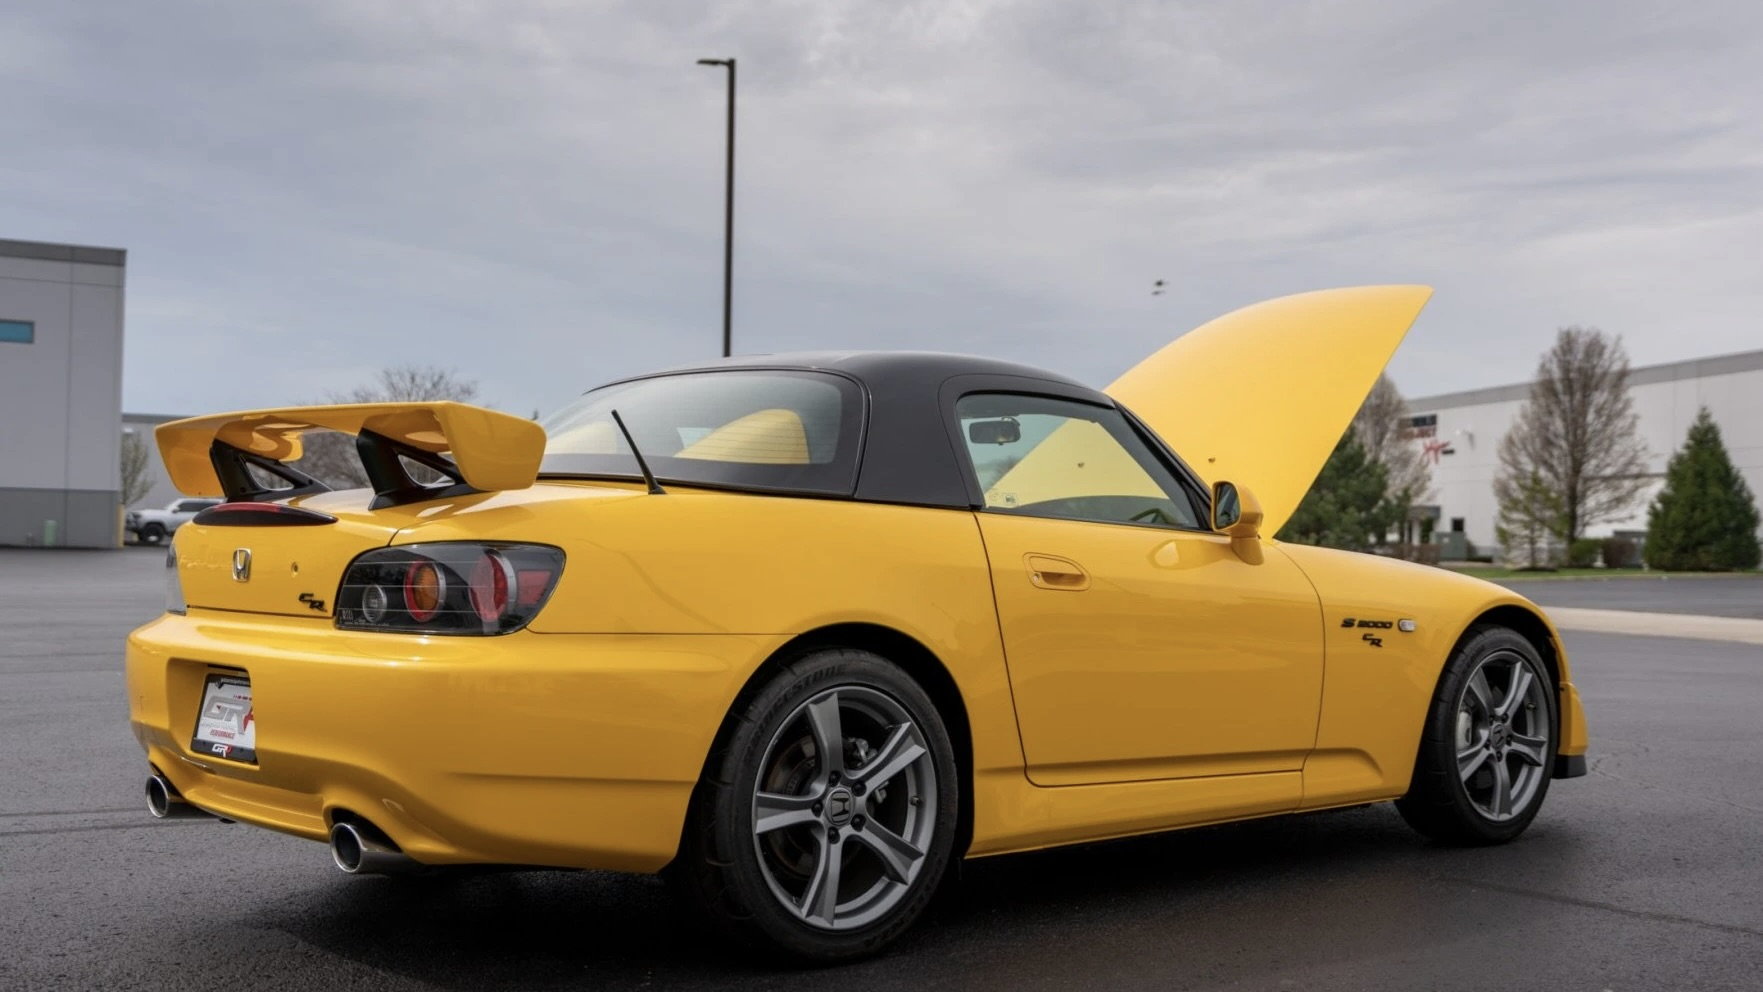 It's Time to Invest in the Honda S2000 JDM Sports Car